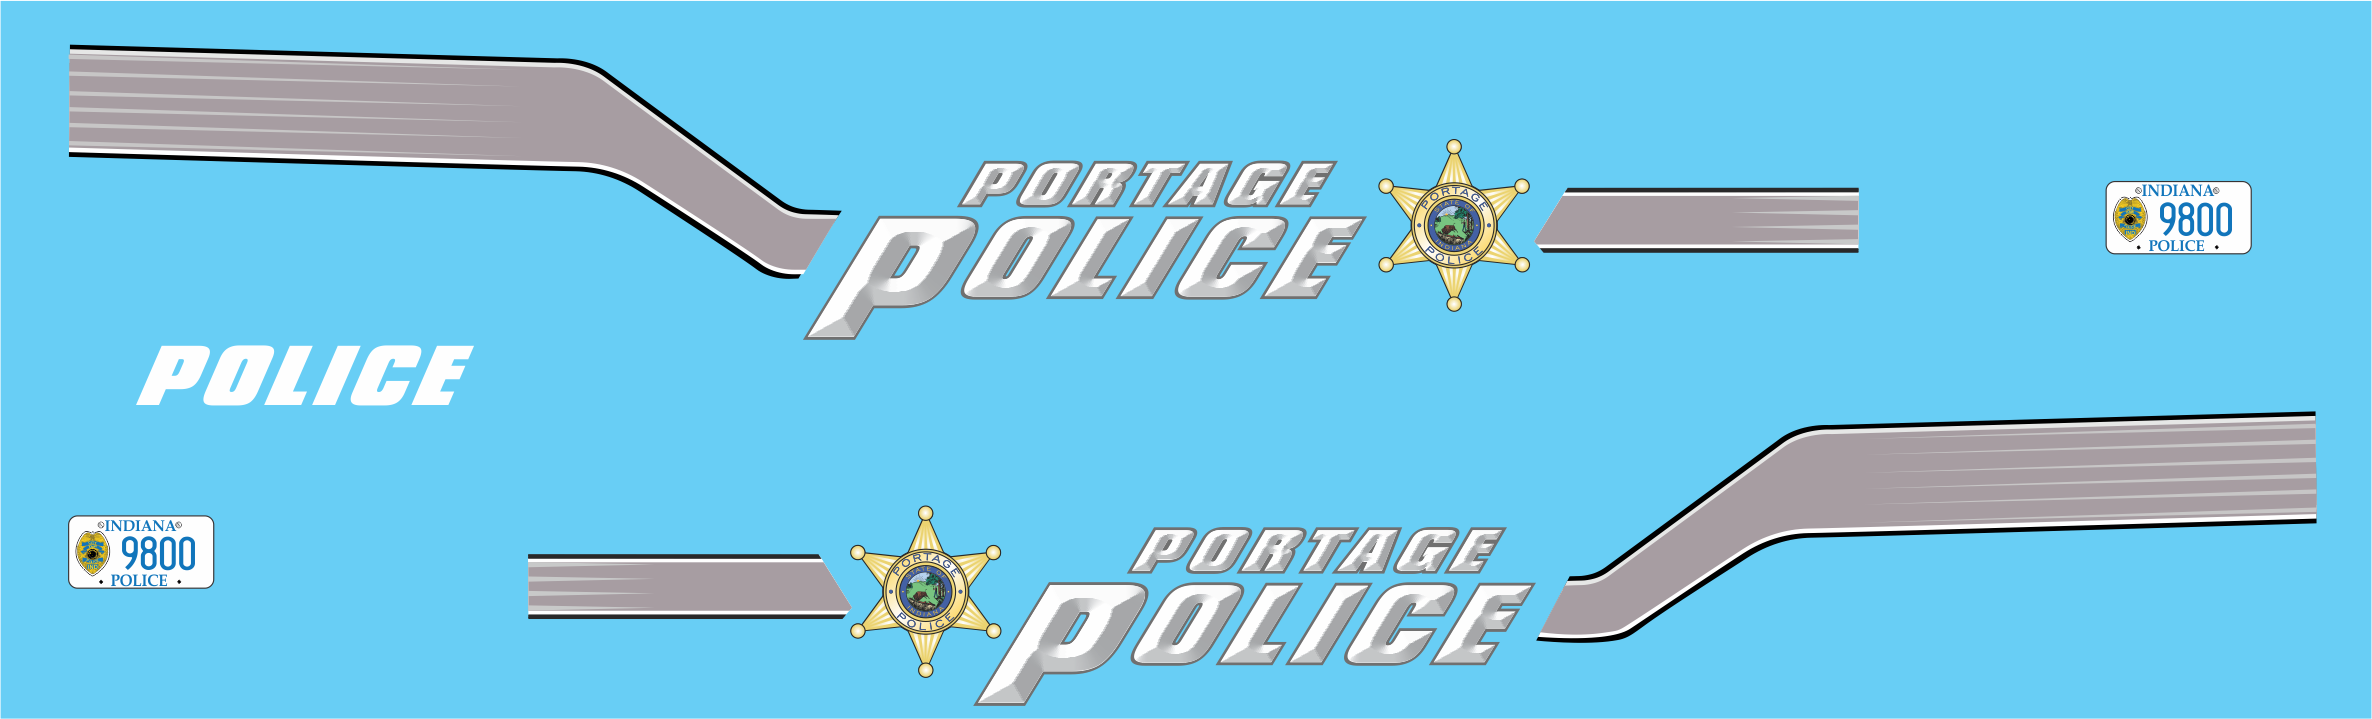 1/43 Portage, Indiana Police Department